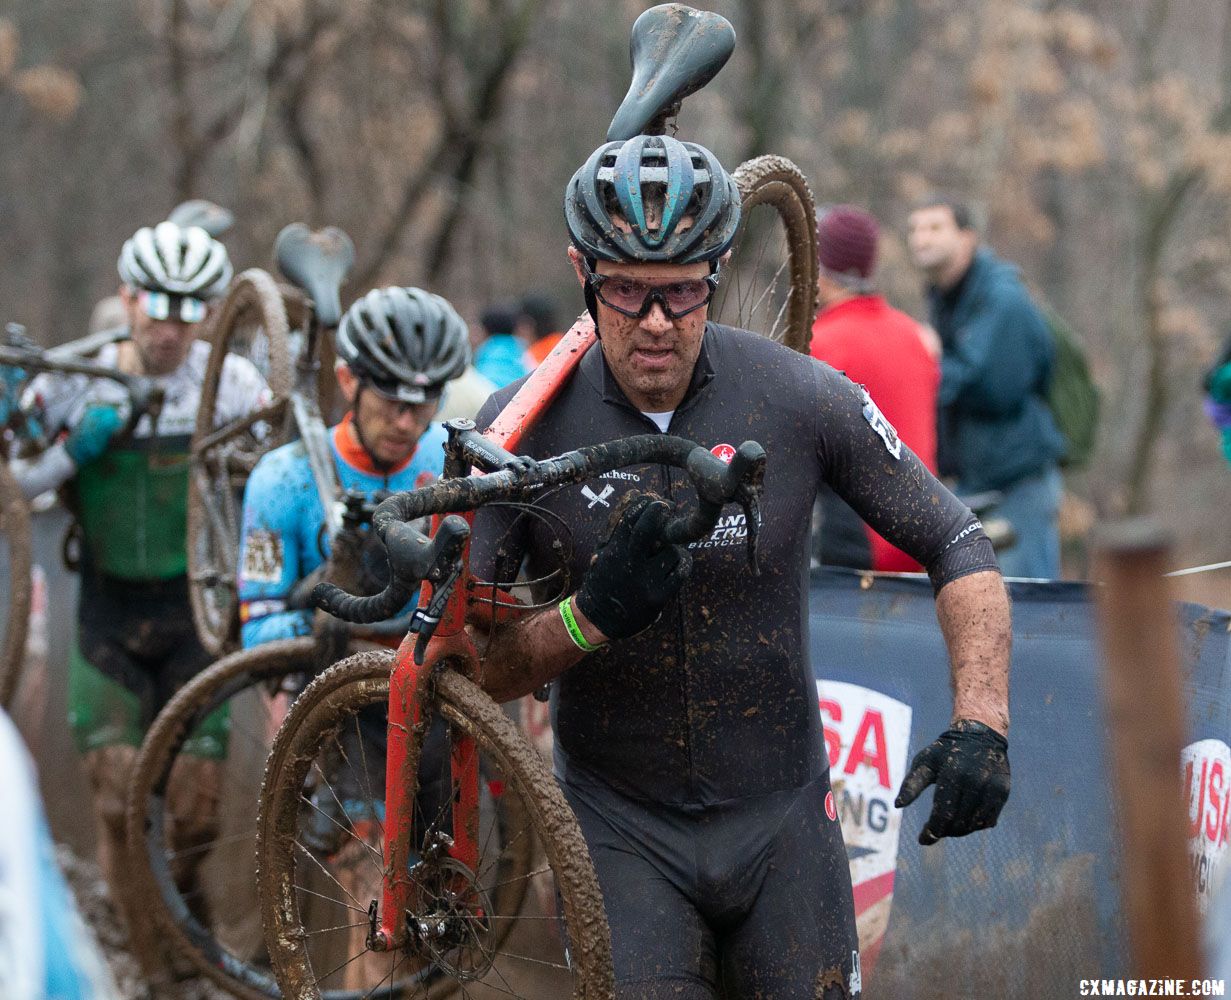 Justin Robinson finished third in the single speed race. Singlespeed Men. 2018 Cyclocross National Championships, Louisville, KY. © A. Yee / Cyclocross Magazine